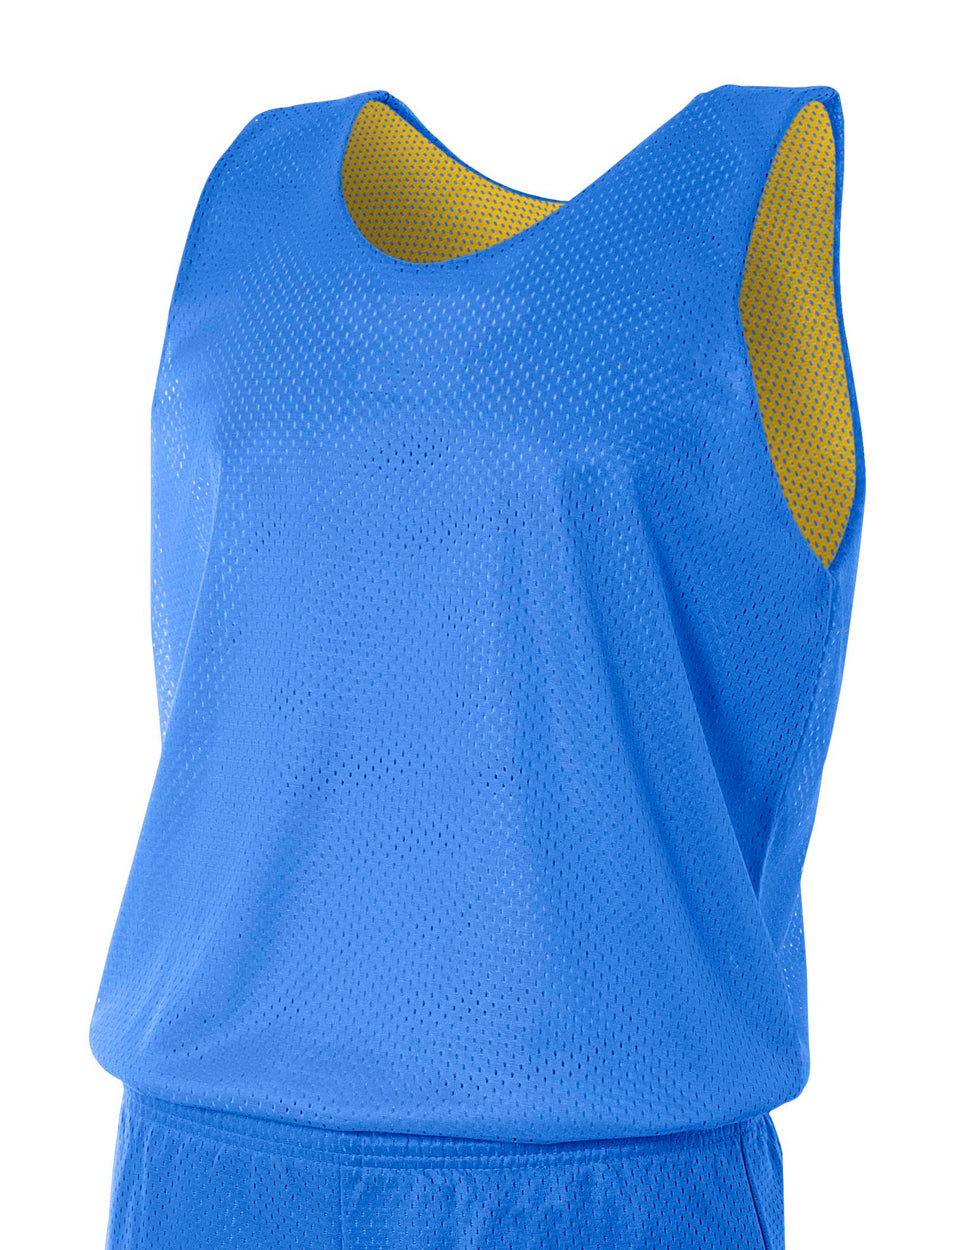 A4 NB4190 Youth All Porthole Practice Jersey, Royal, L/XL